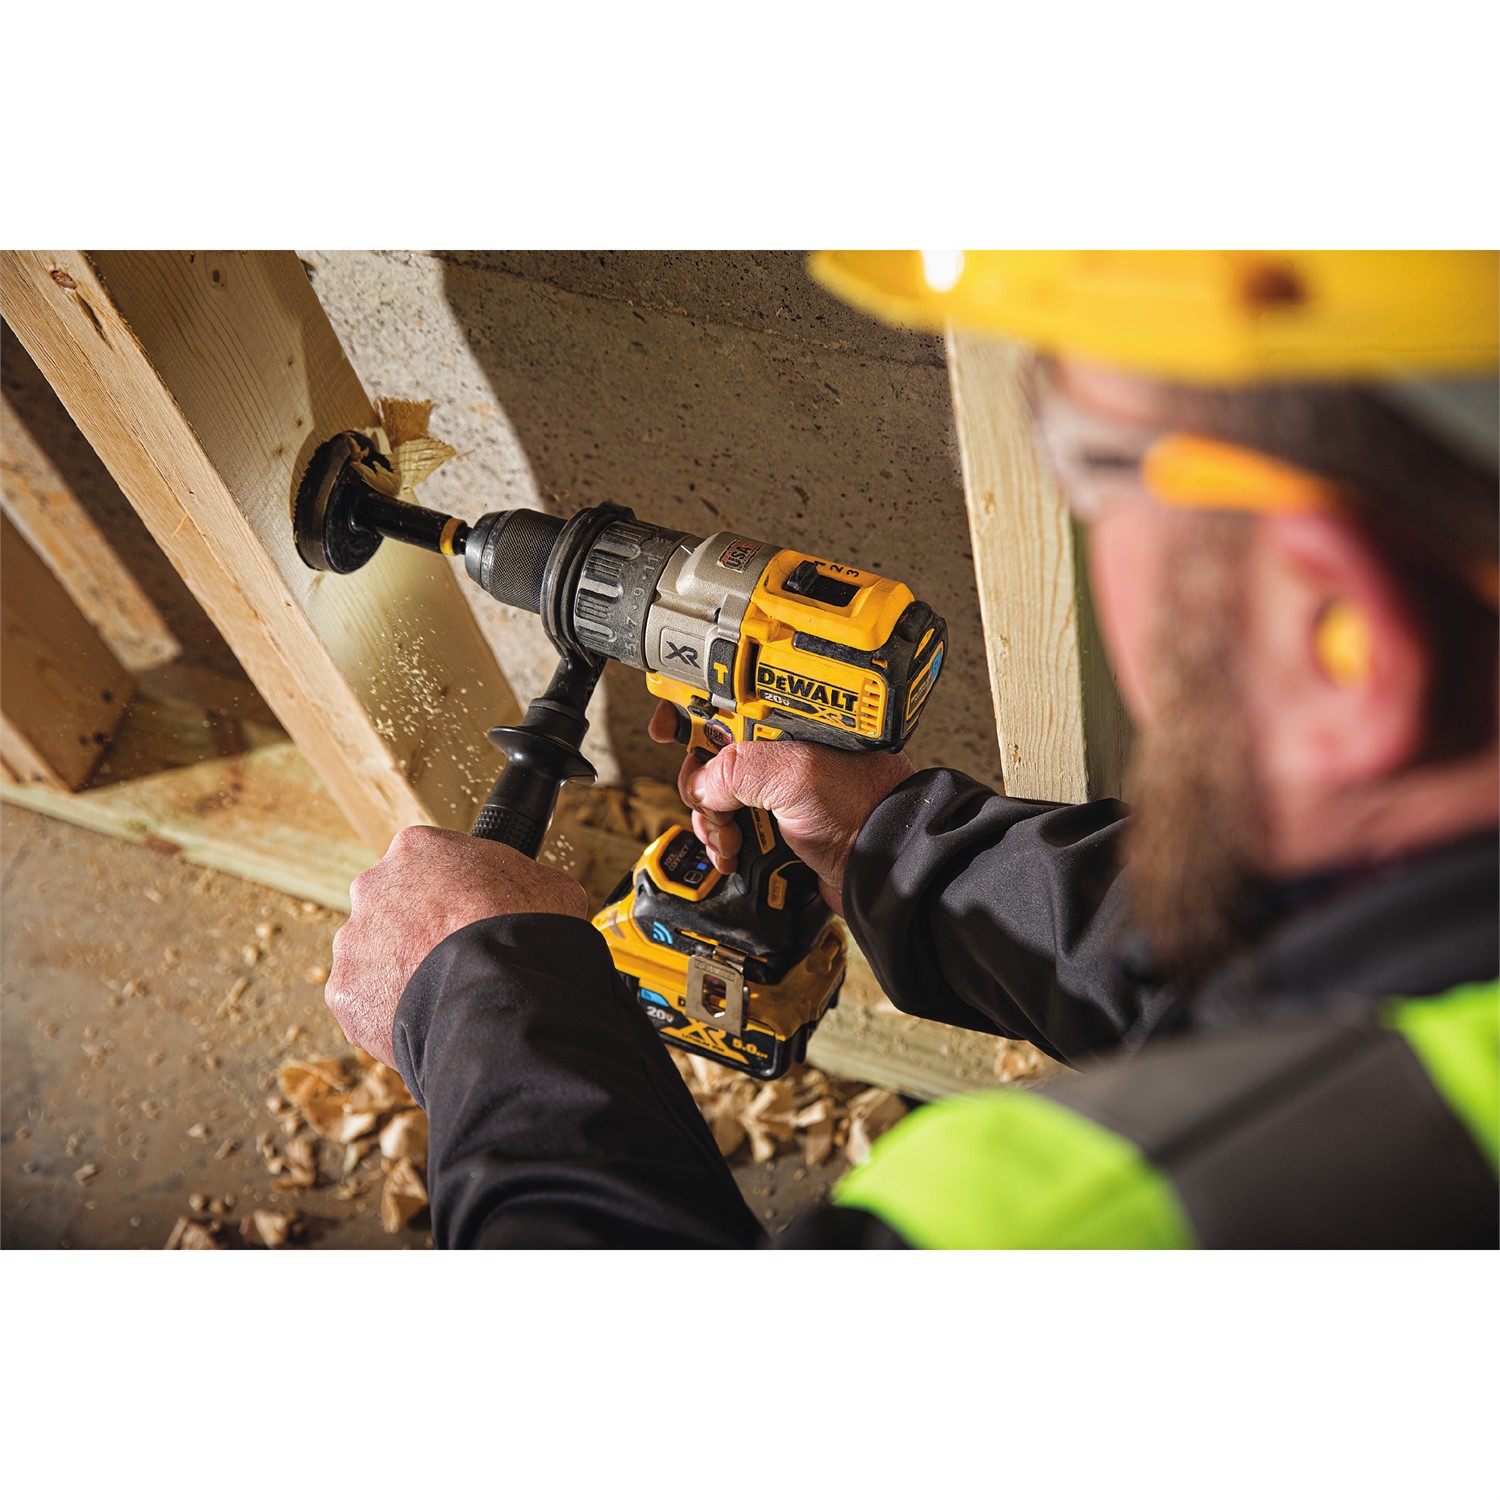 With integrated Bluetooth® capability, the new DEWALT 20V MAX* XR® Tool Connect™ 3-Speed Hammerdrill (DCD997) can be connected to the Tool Connect™ app.